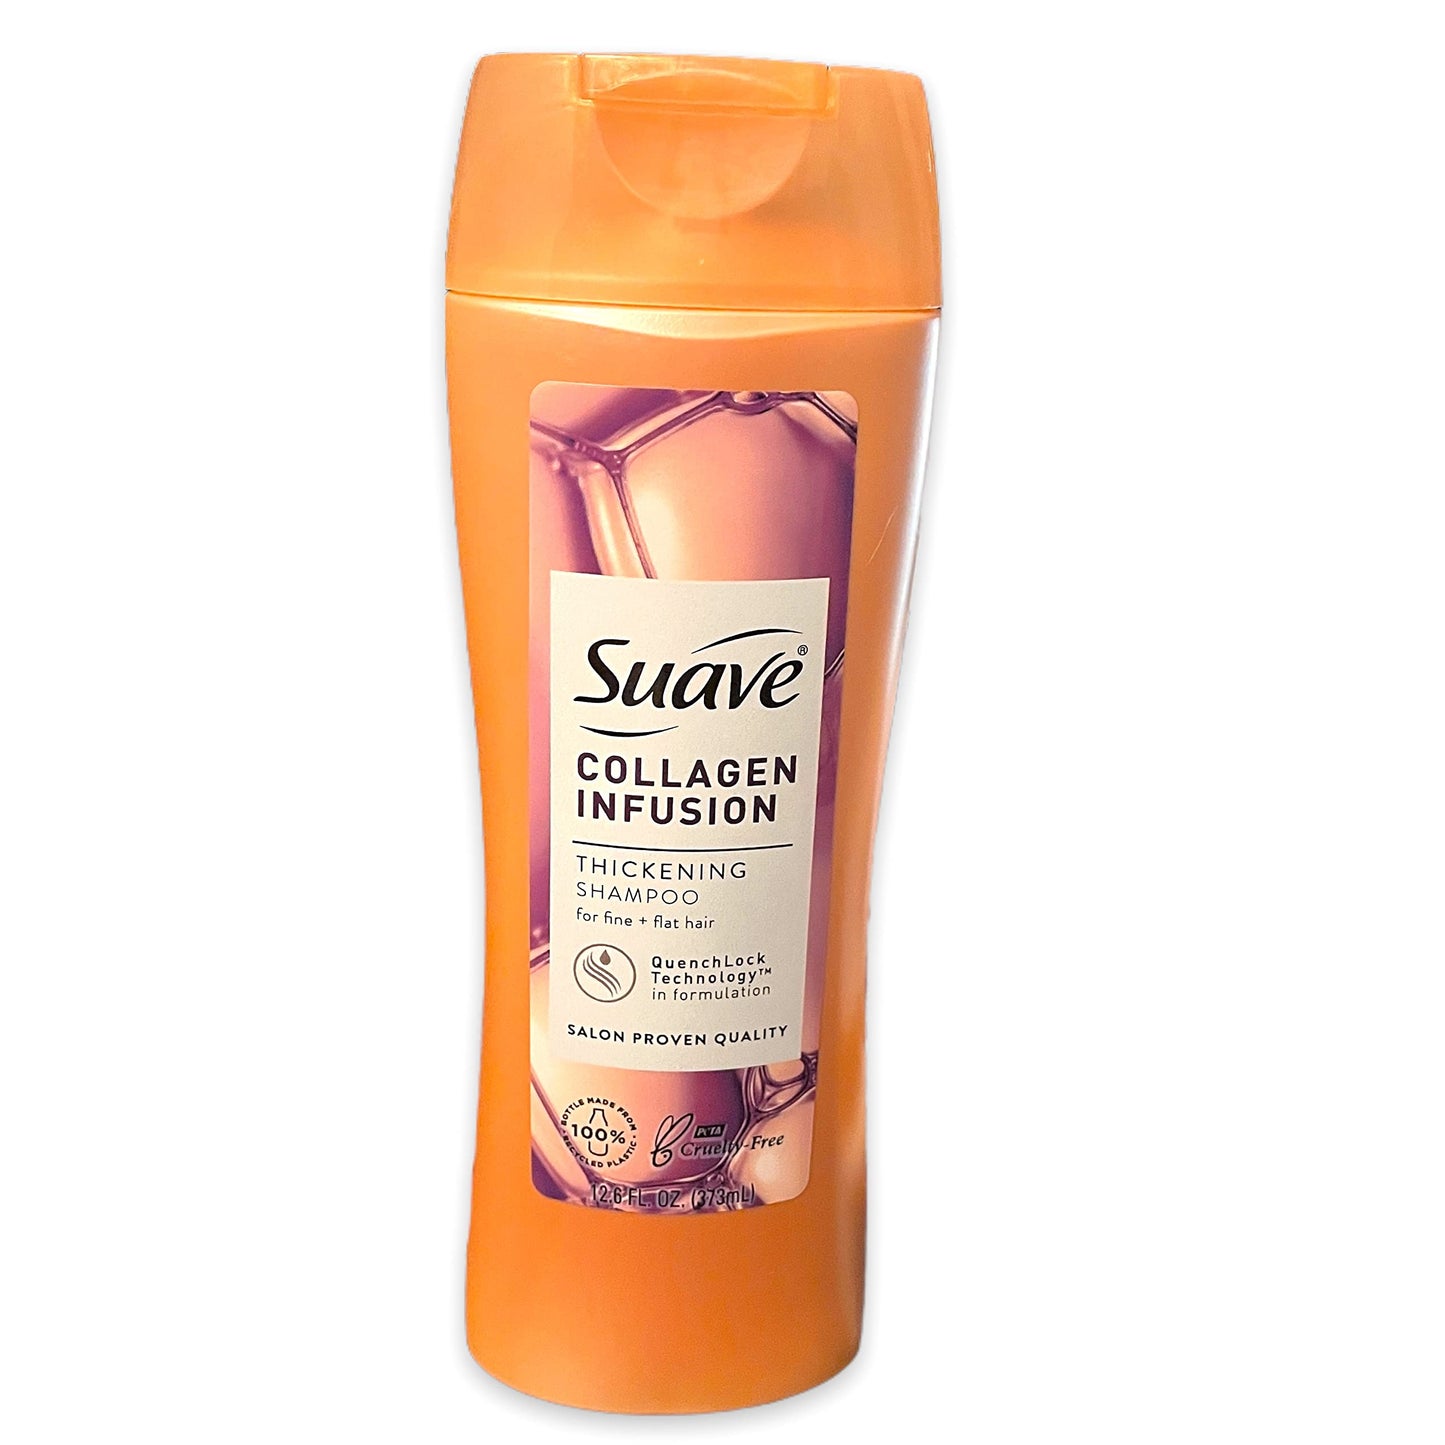 Suave Professionals Collagen Infusion Thickening shampoo